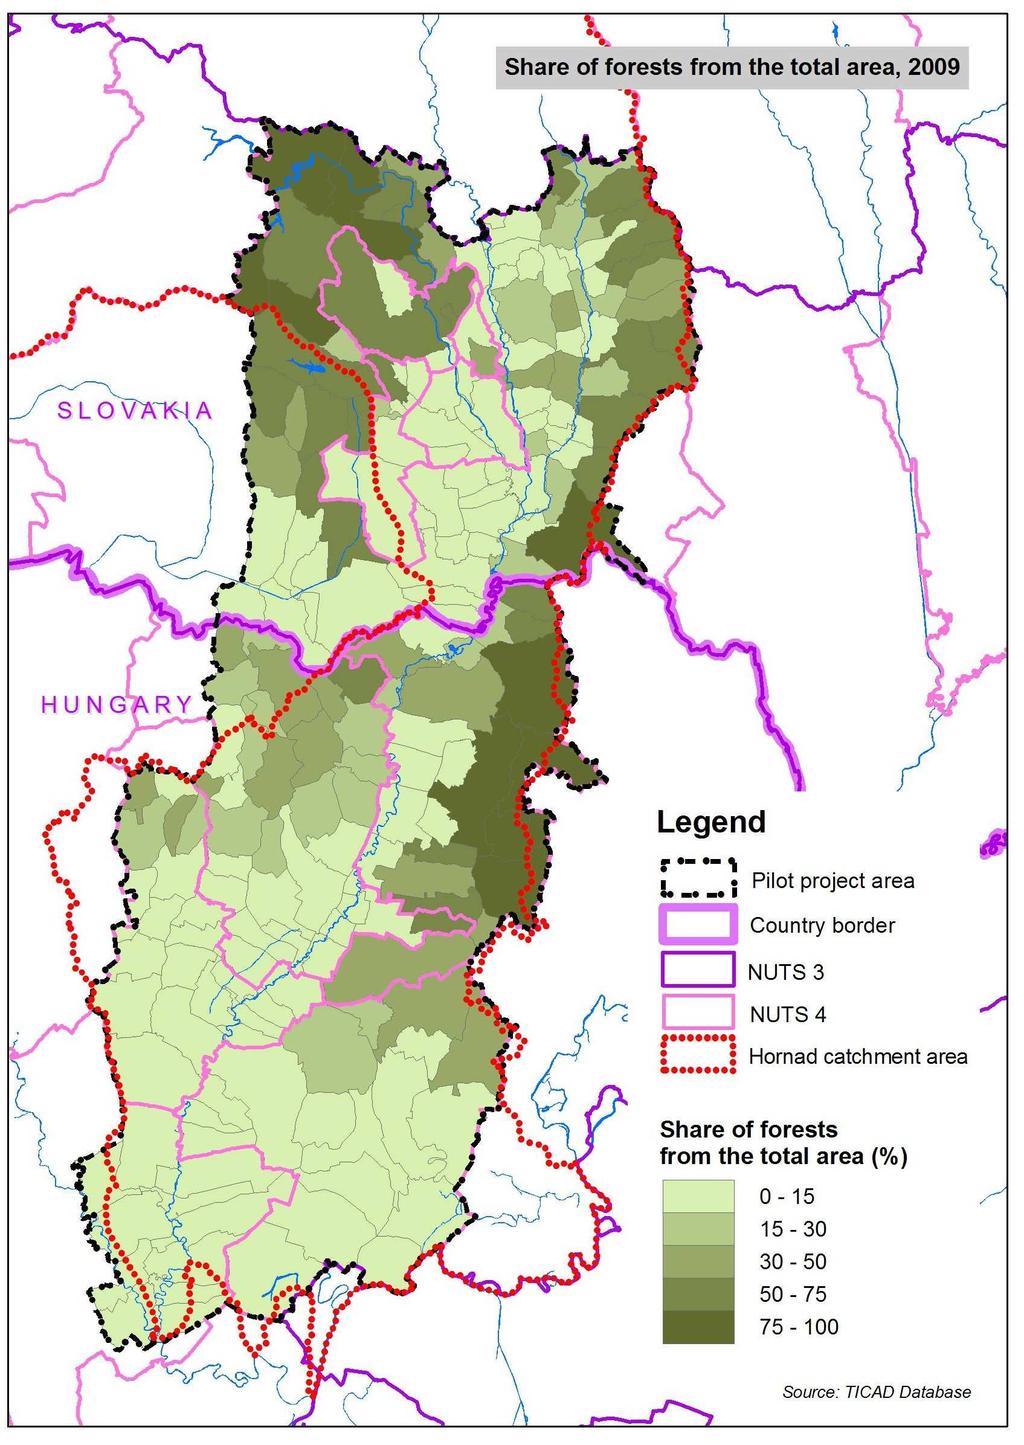 Forests are mostly in the northwest and east part of the pilot area.